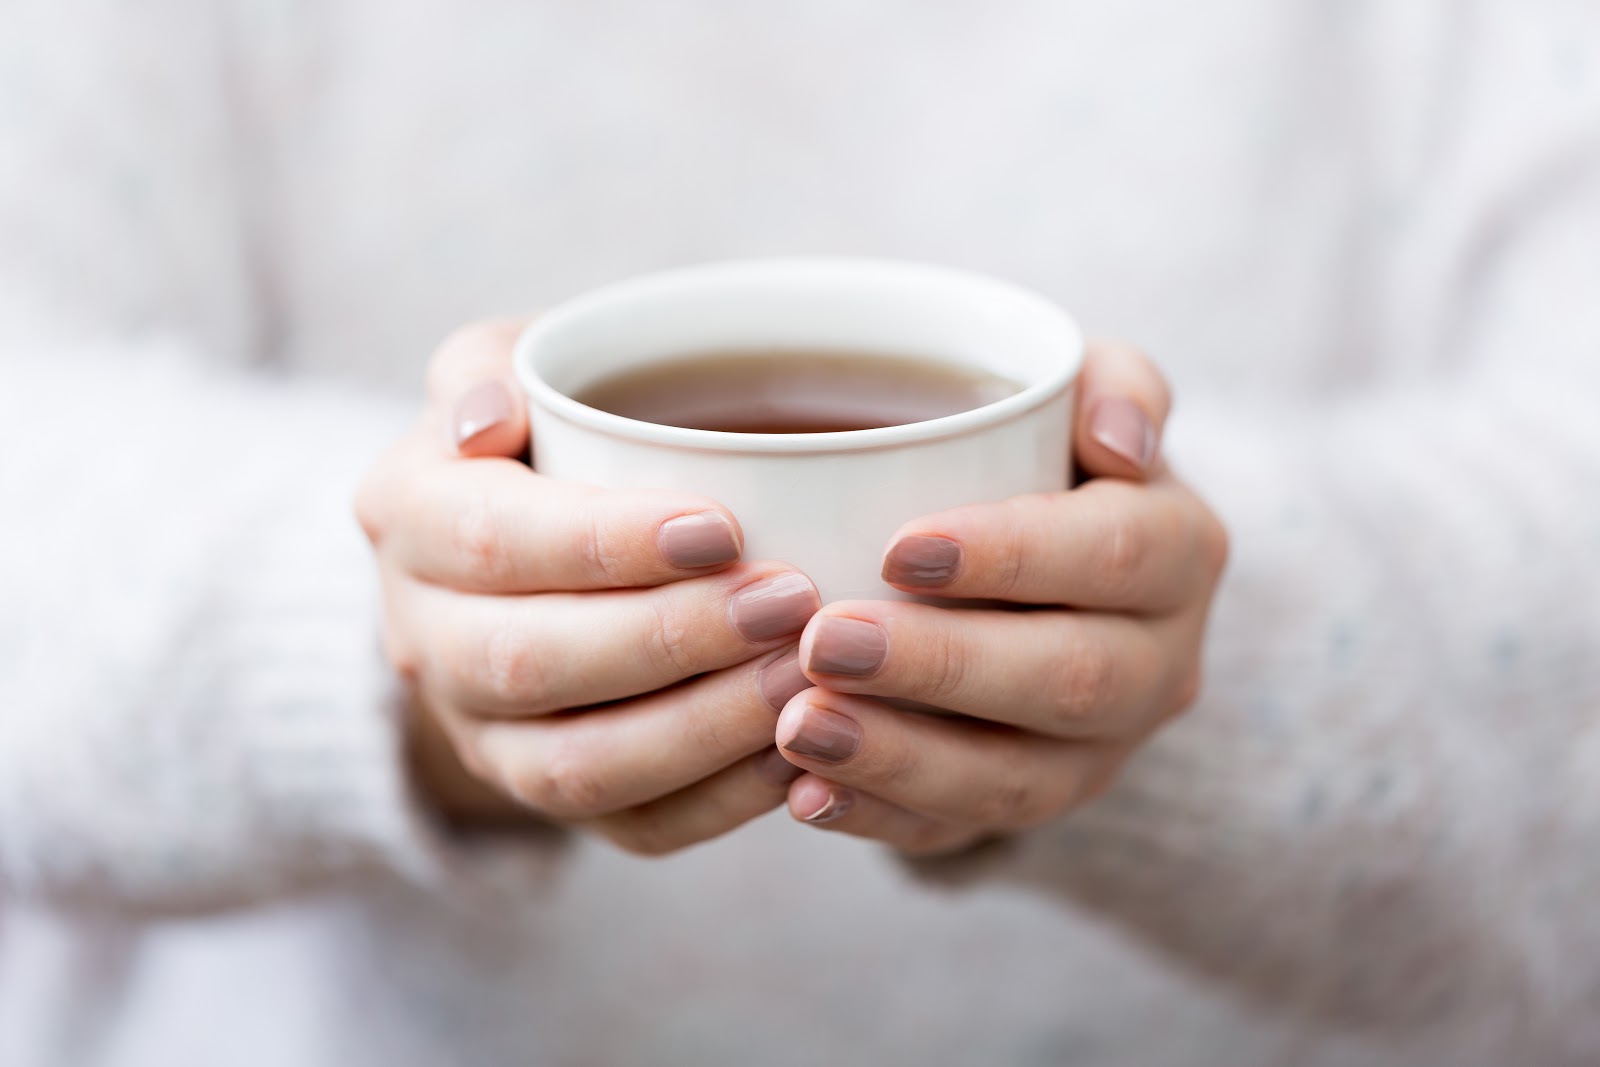 Woman's hands holding a cup of tea